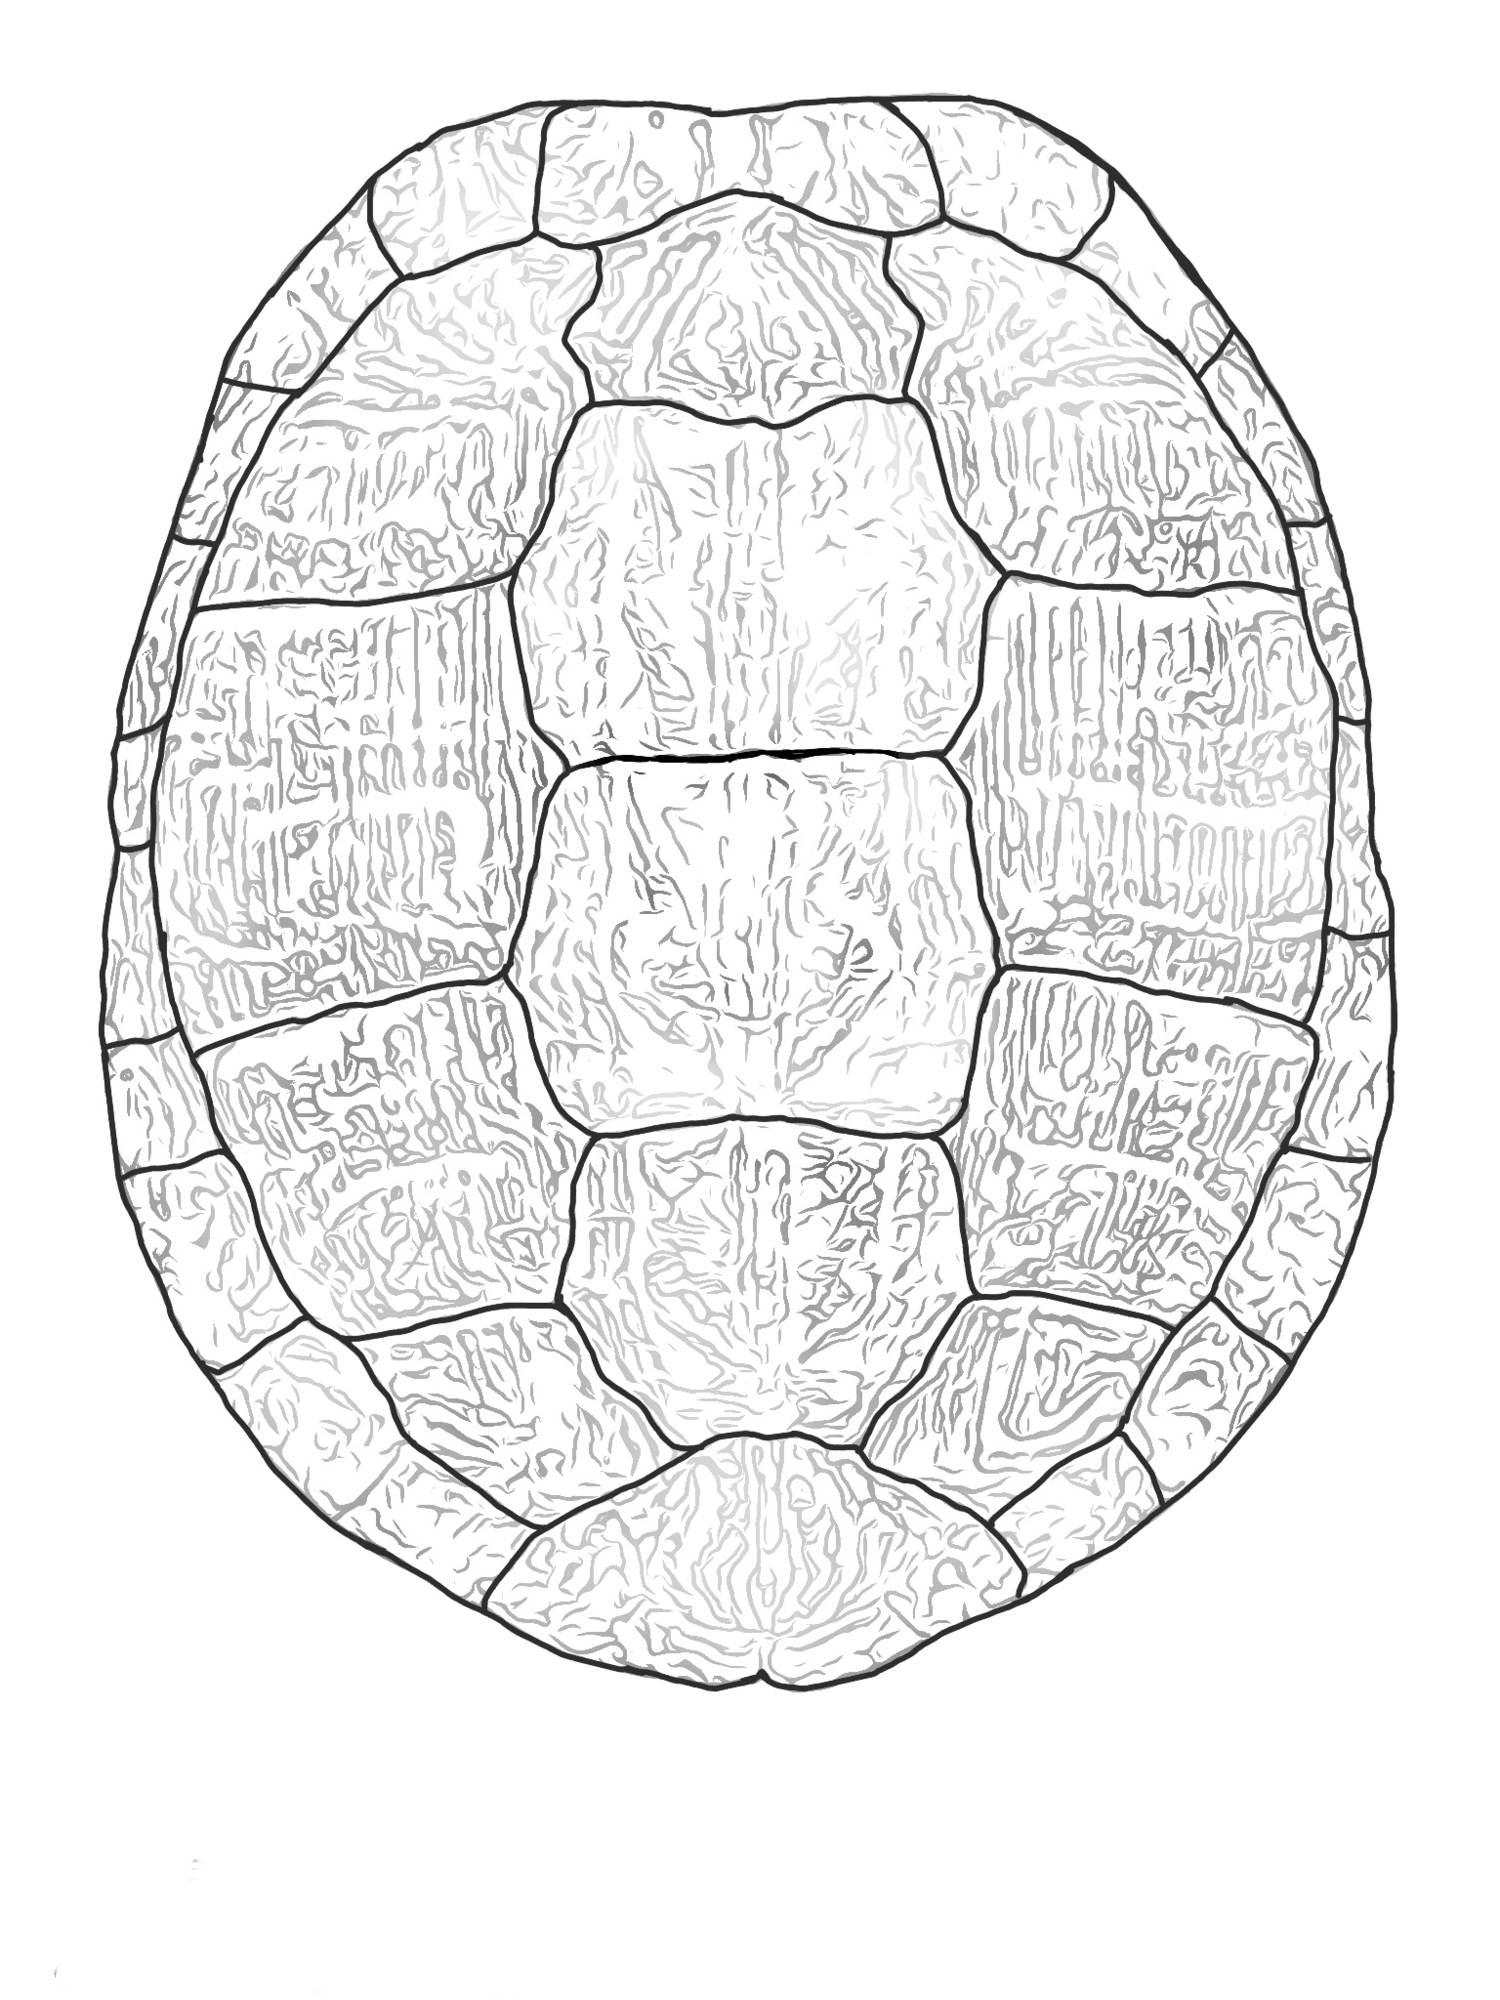 Black and white illustration of a turtle shell.